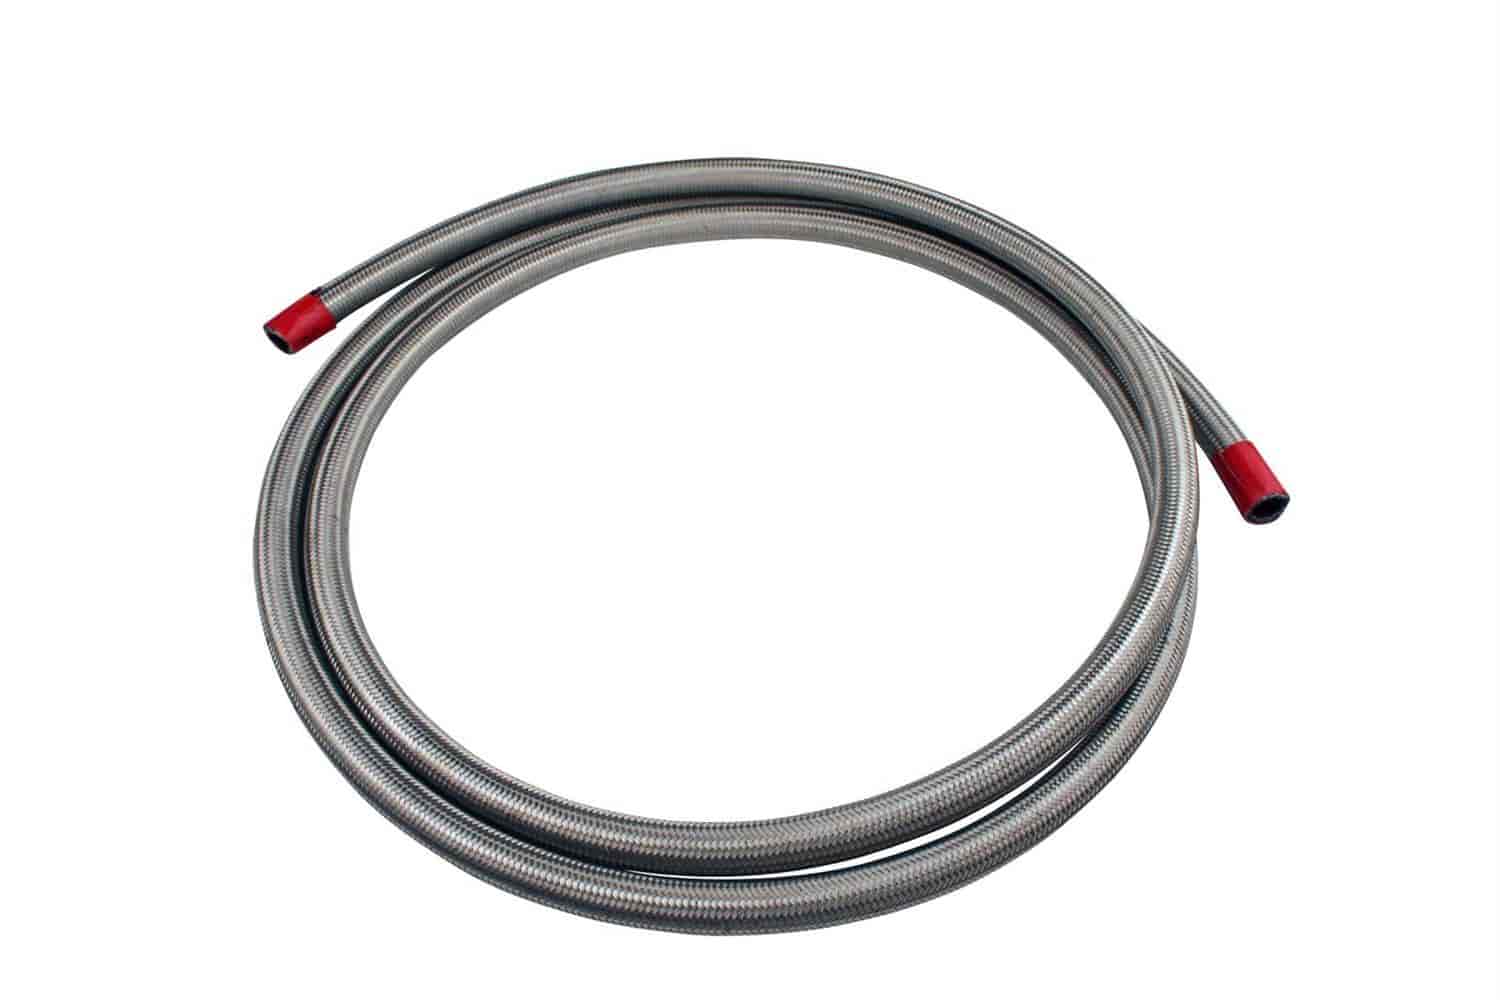 Braided Stainless Steel Fuel Hose -8AN x 8 ft